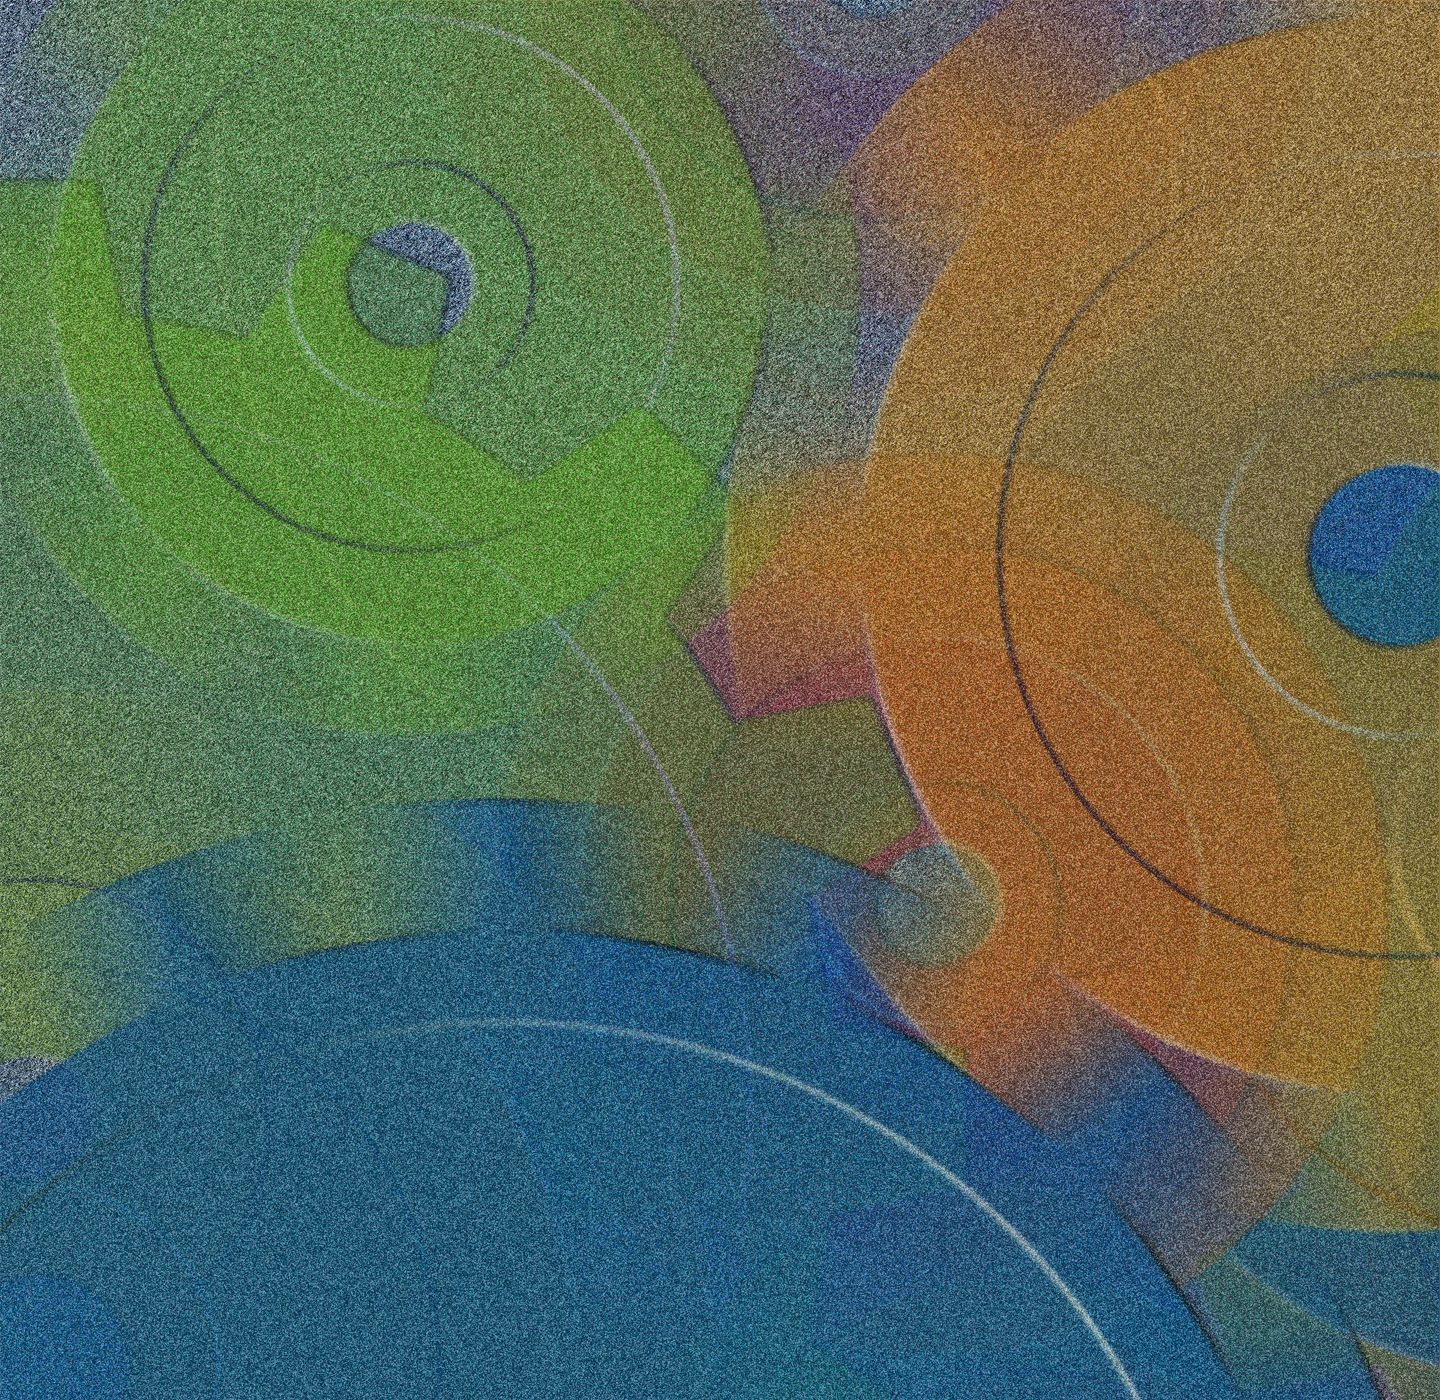 Colorful abstract image of interlocking gears in motion.